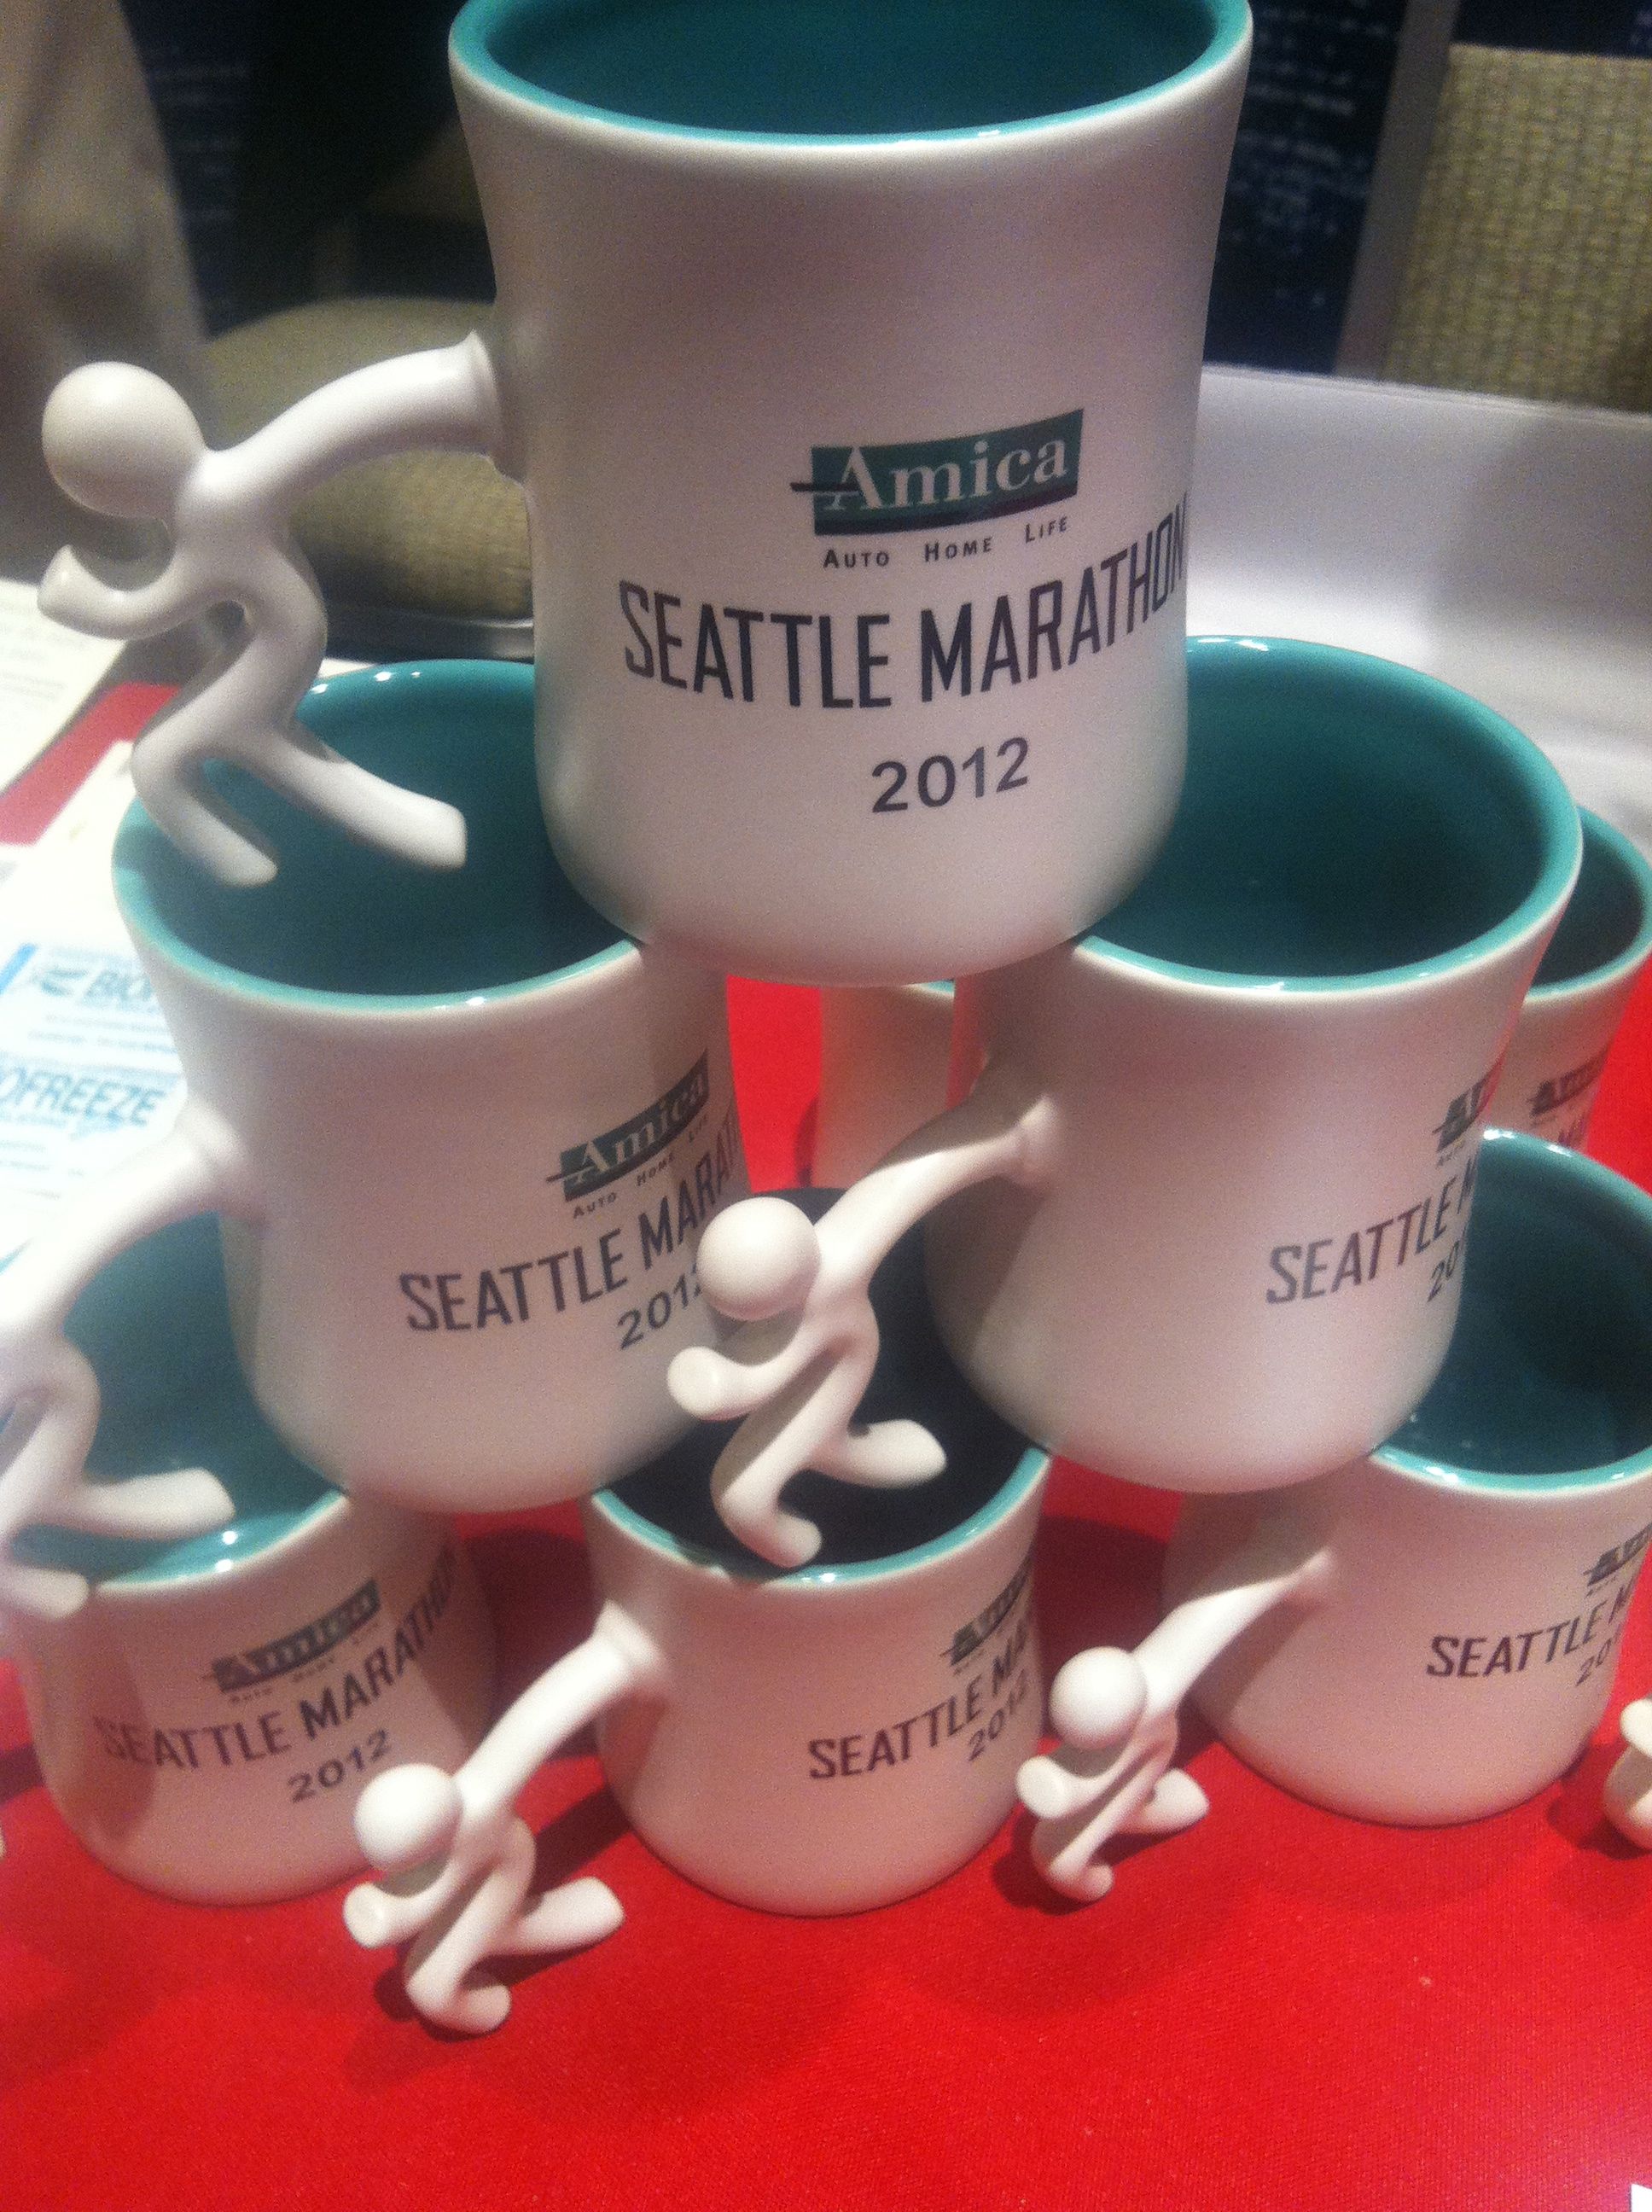 Awesome mugs from the Seattle half marathon